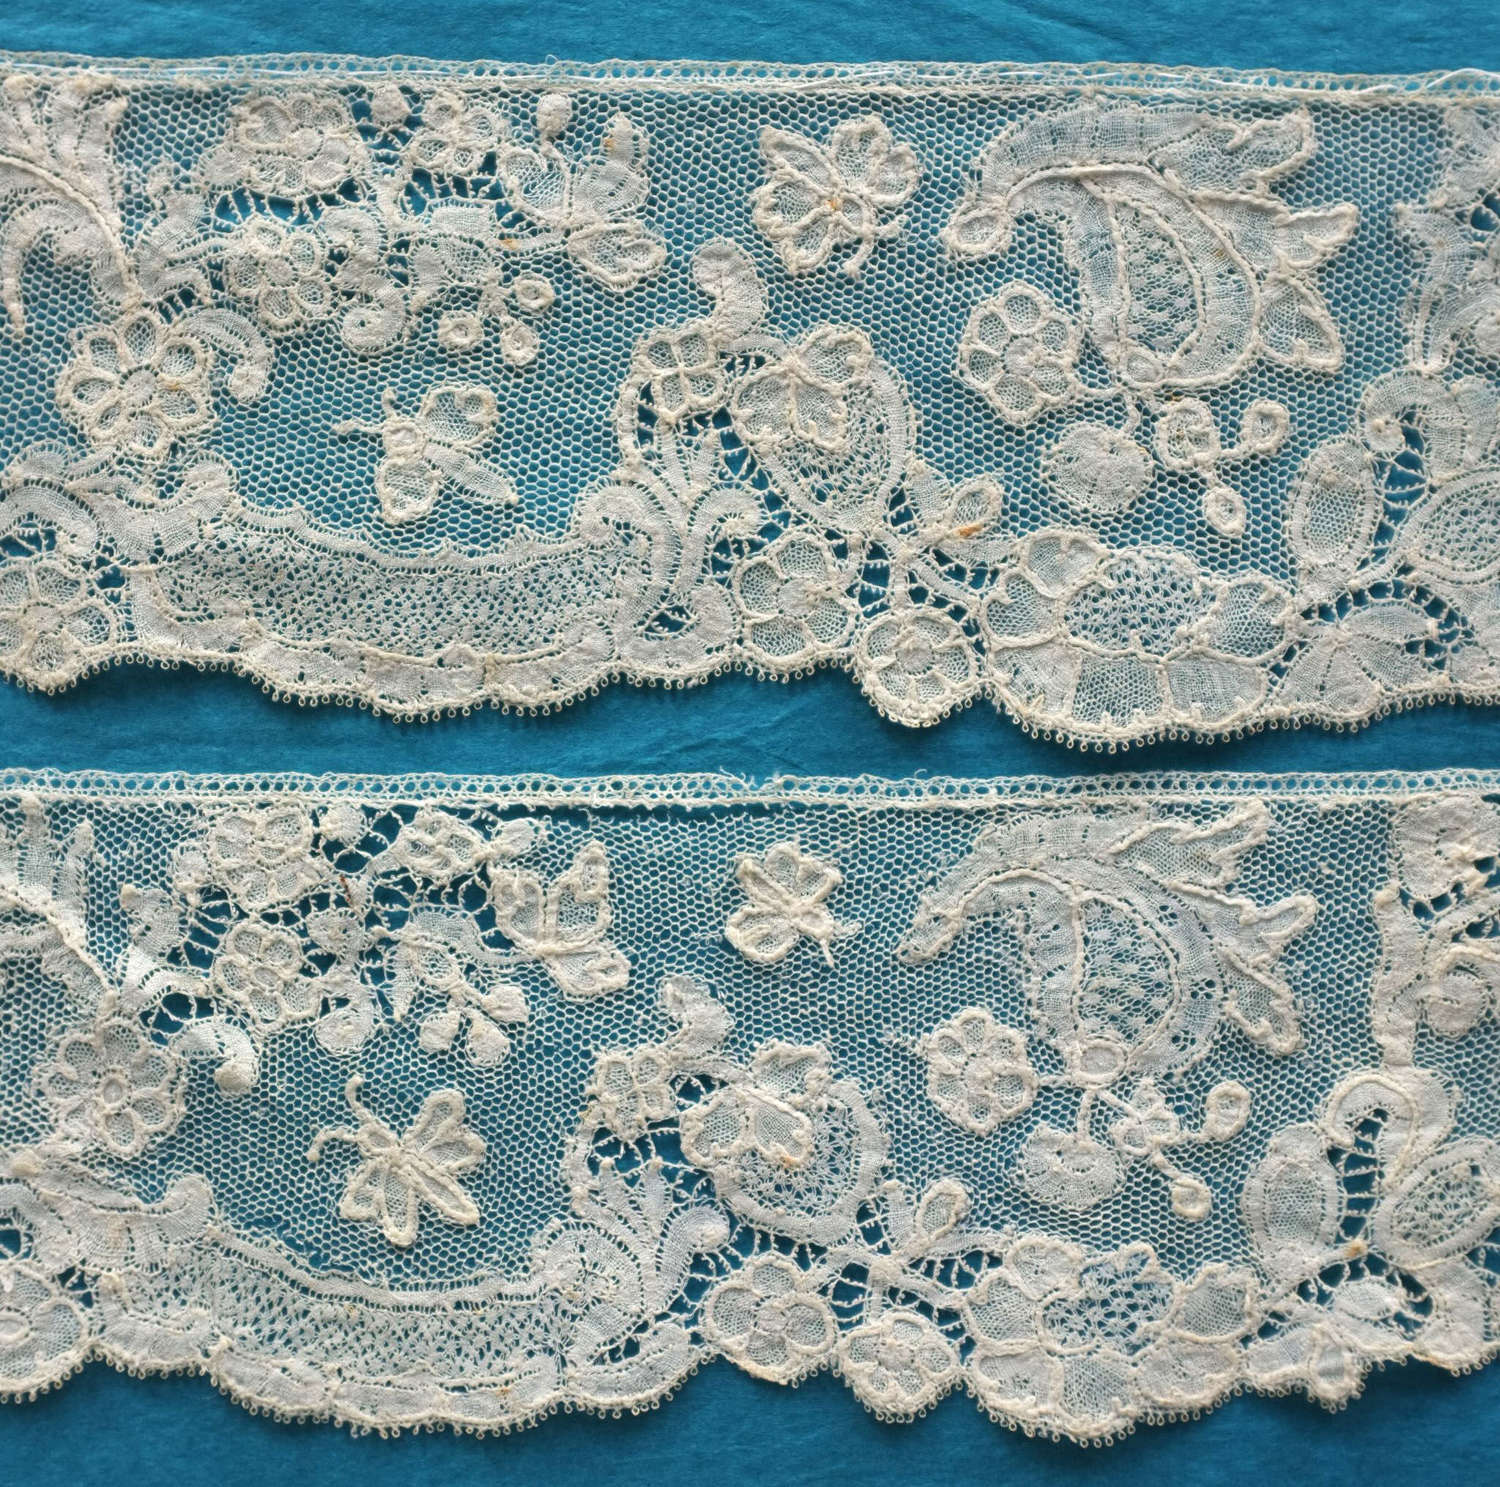 Antique 18th Century Brussels Bobbin Lace with Butterflies